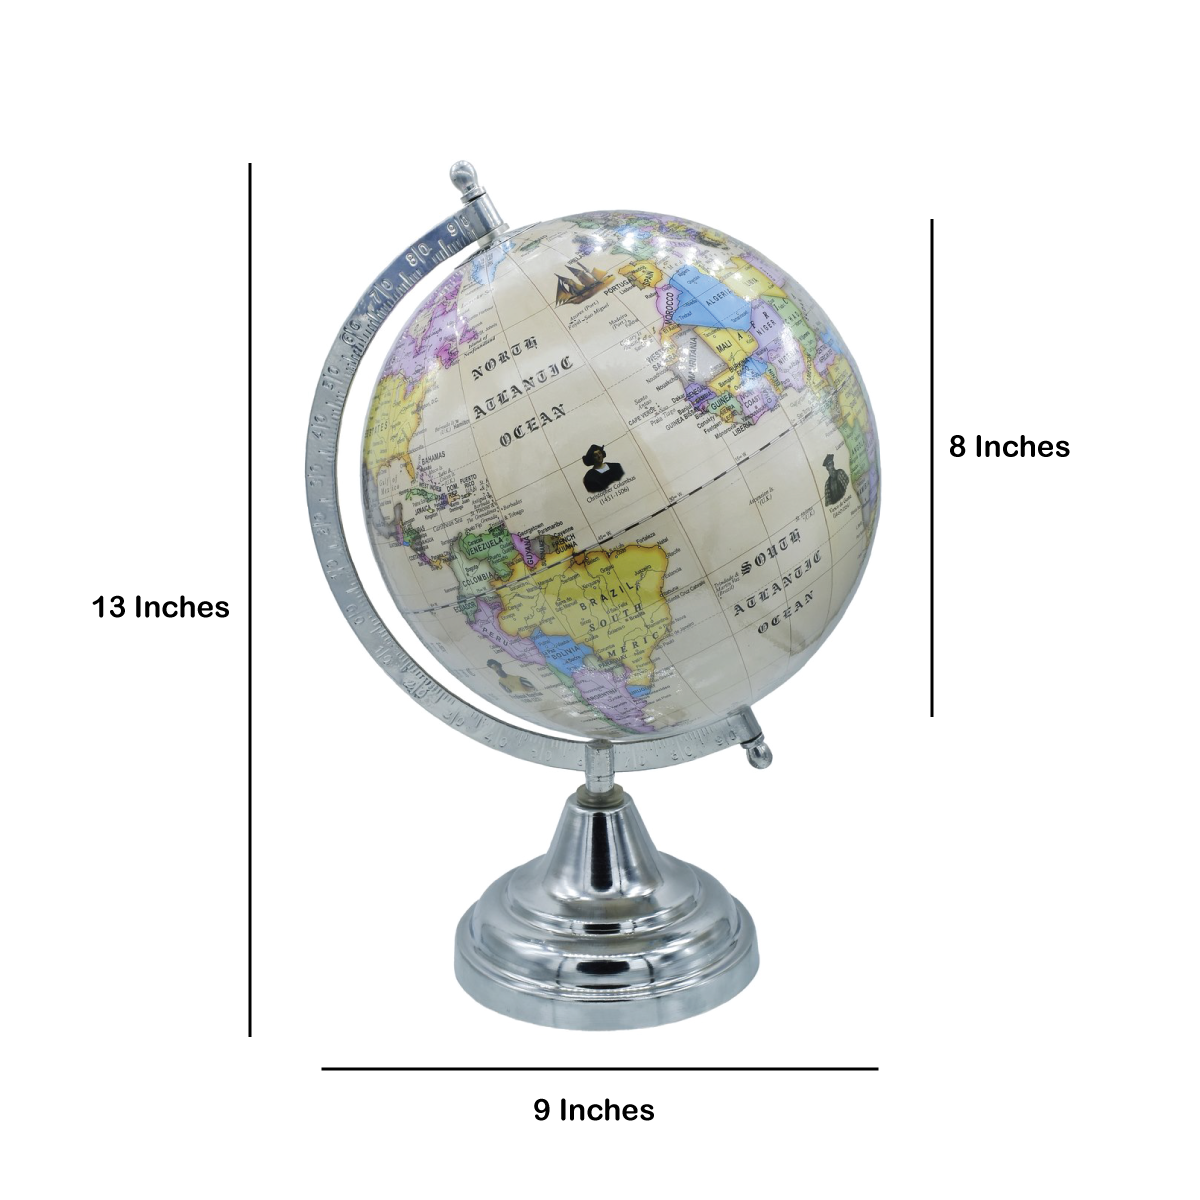 Silver Base 8 Inch Antique World Globe Table Top - For Shops, Schools, Corporates, Office Use, Corporate Gifting